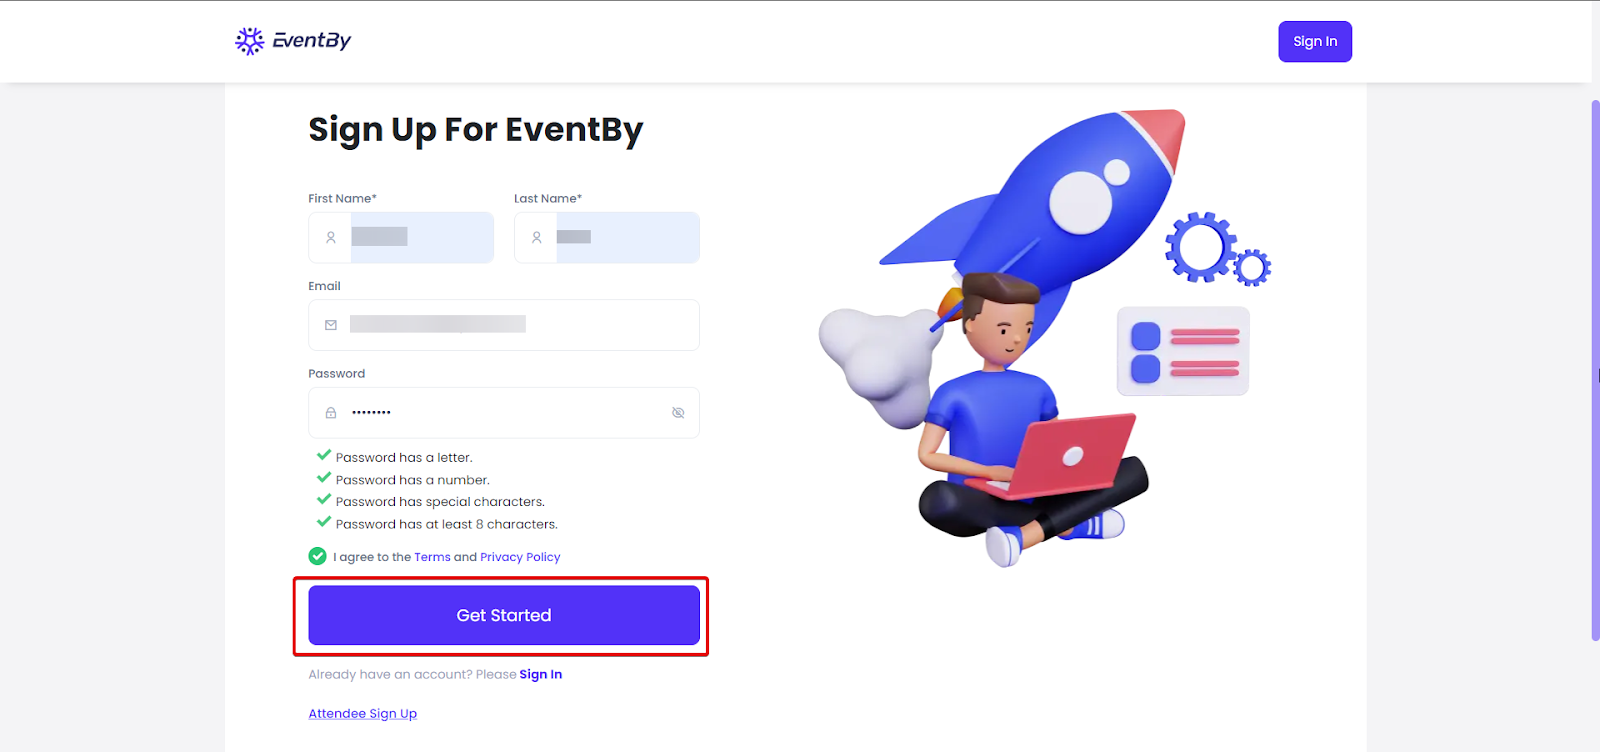 Create Your EventBy Account